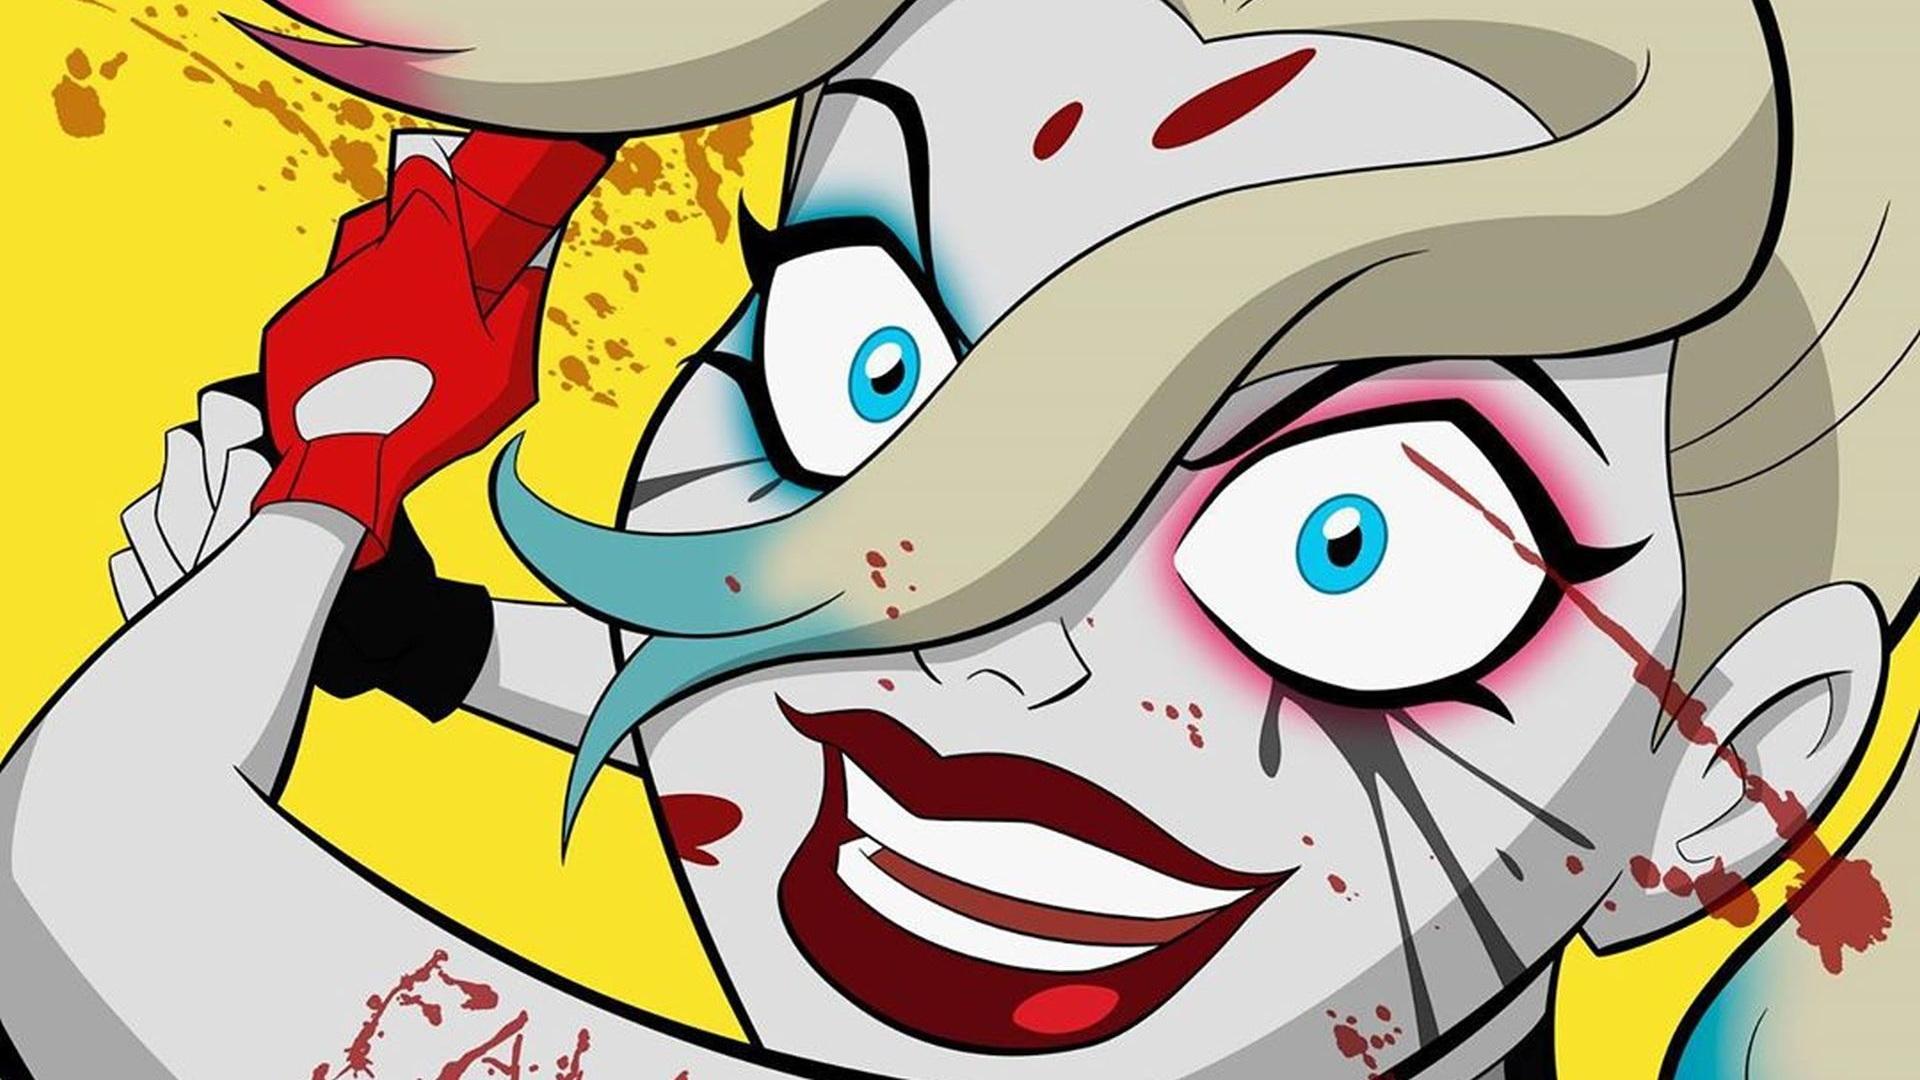 New Bloody Poster for The HARLEY QUINN Animated Series Confirms